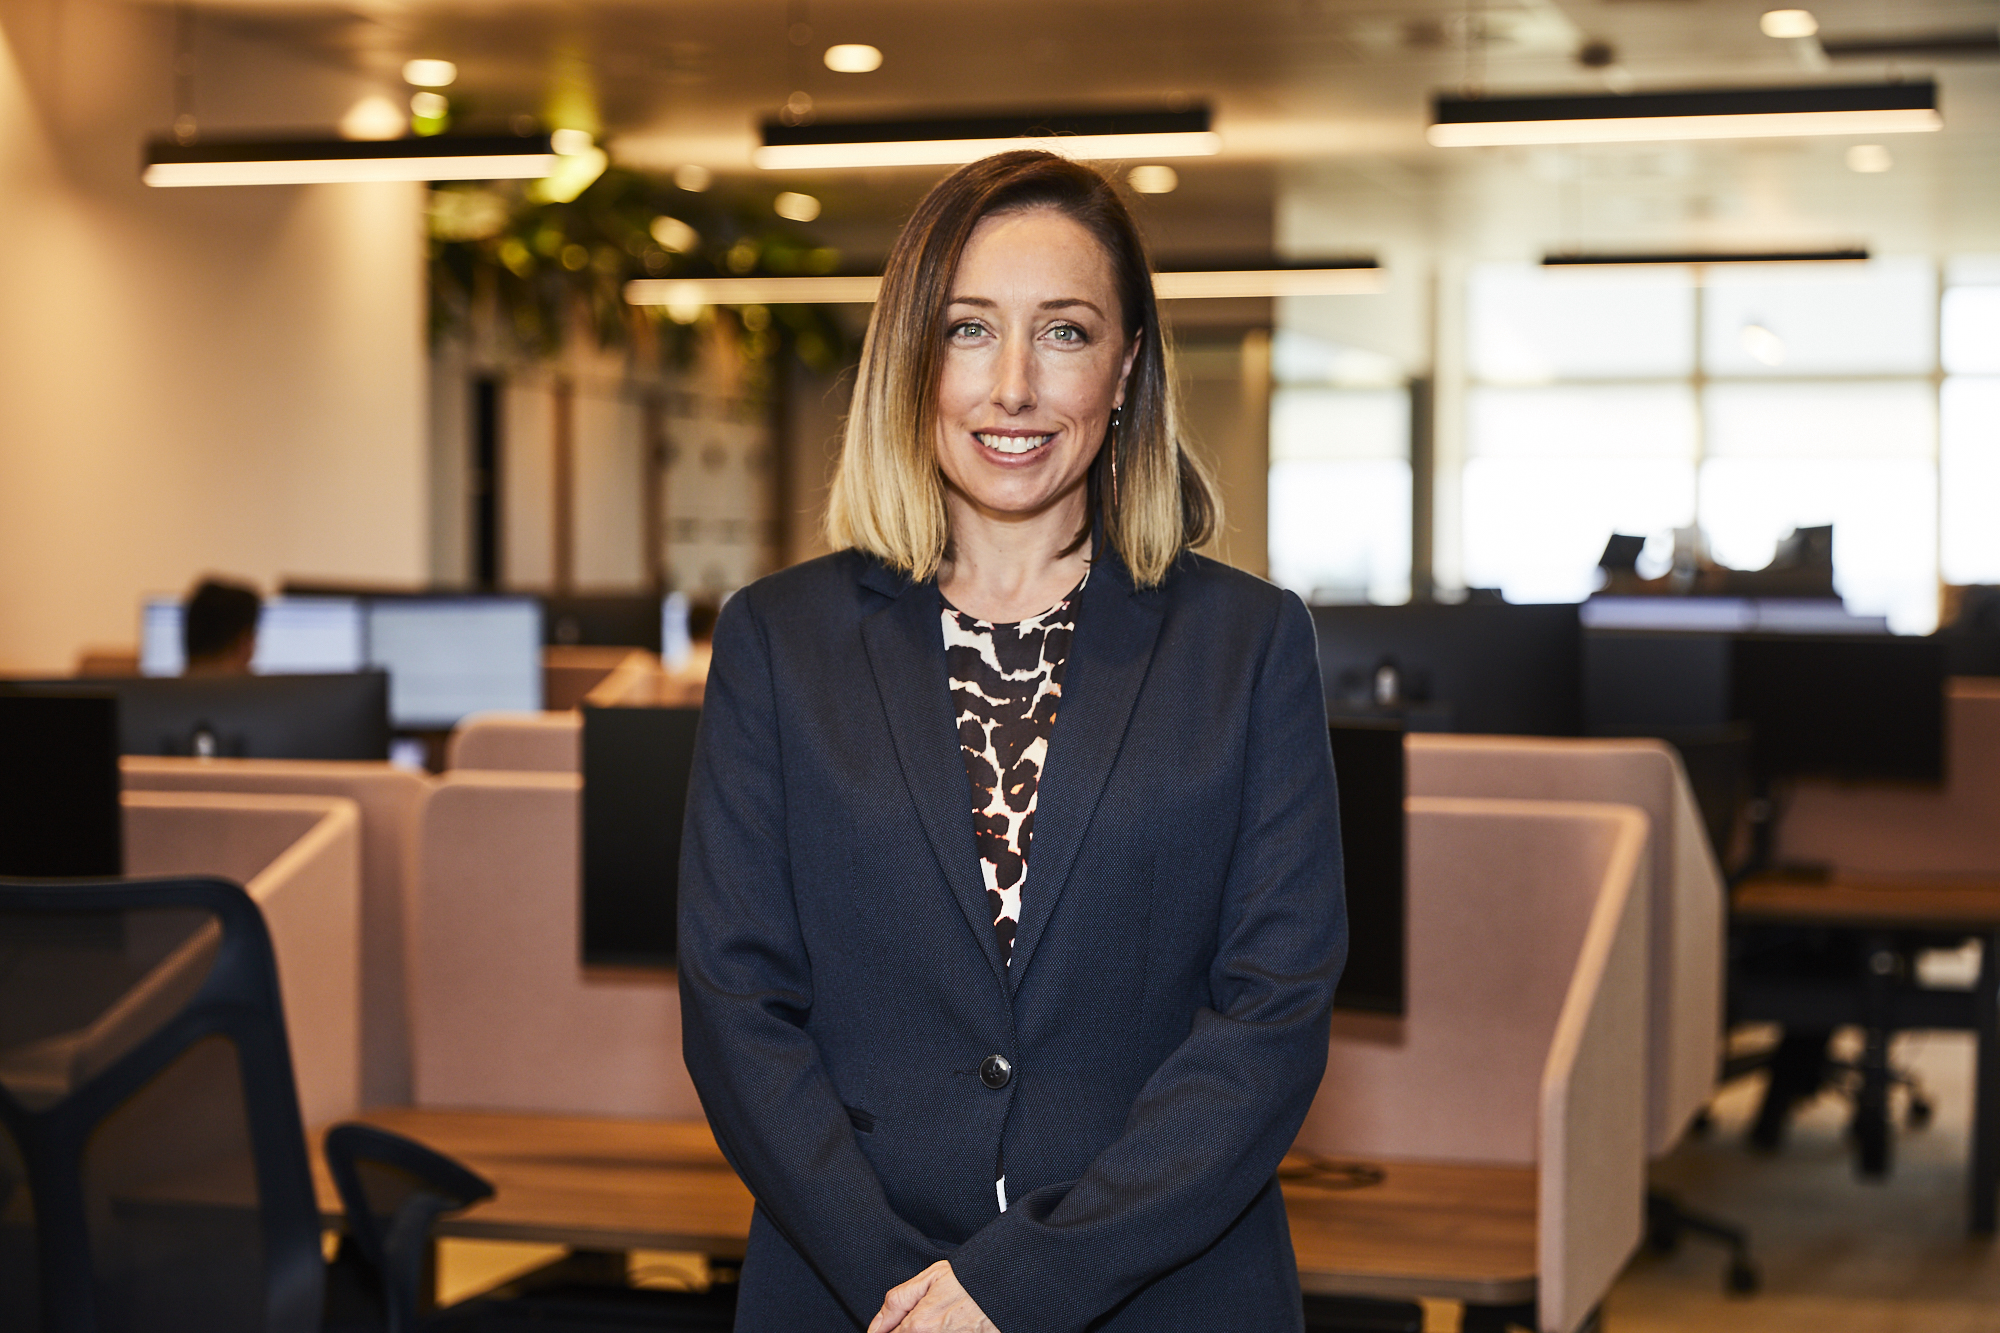 Peta joined the VFFF team as EA to the CEO in August 2019 and brings over 15 years’ experience working as a C-Suite Executive Assistant across a variety of industries such as banking, real estate, medical technology, retail and media sales in both privately operated and publicly listed companies, and most recently a non-government mental health organisation. She has extensive experience and strengths in corporate governance, event management, change and project management. Peta holds various qualifications in executive secretarial studies, marketing, and project management and is a member of a number of EA networks and industry groups. 